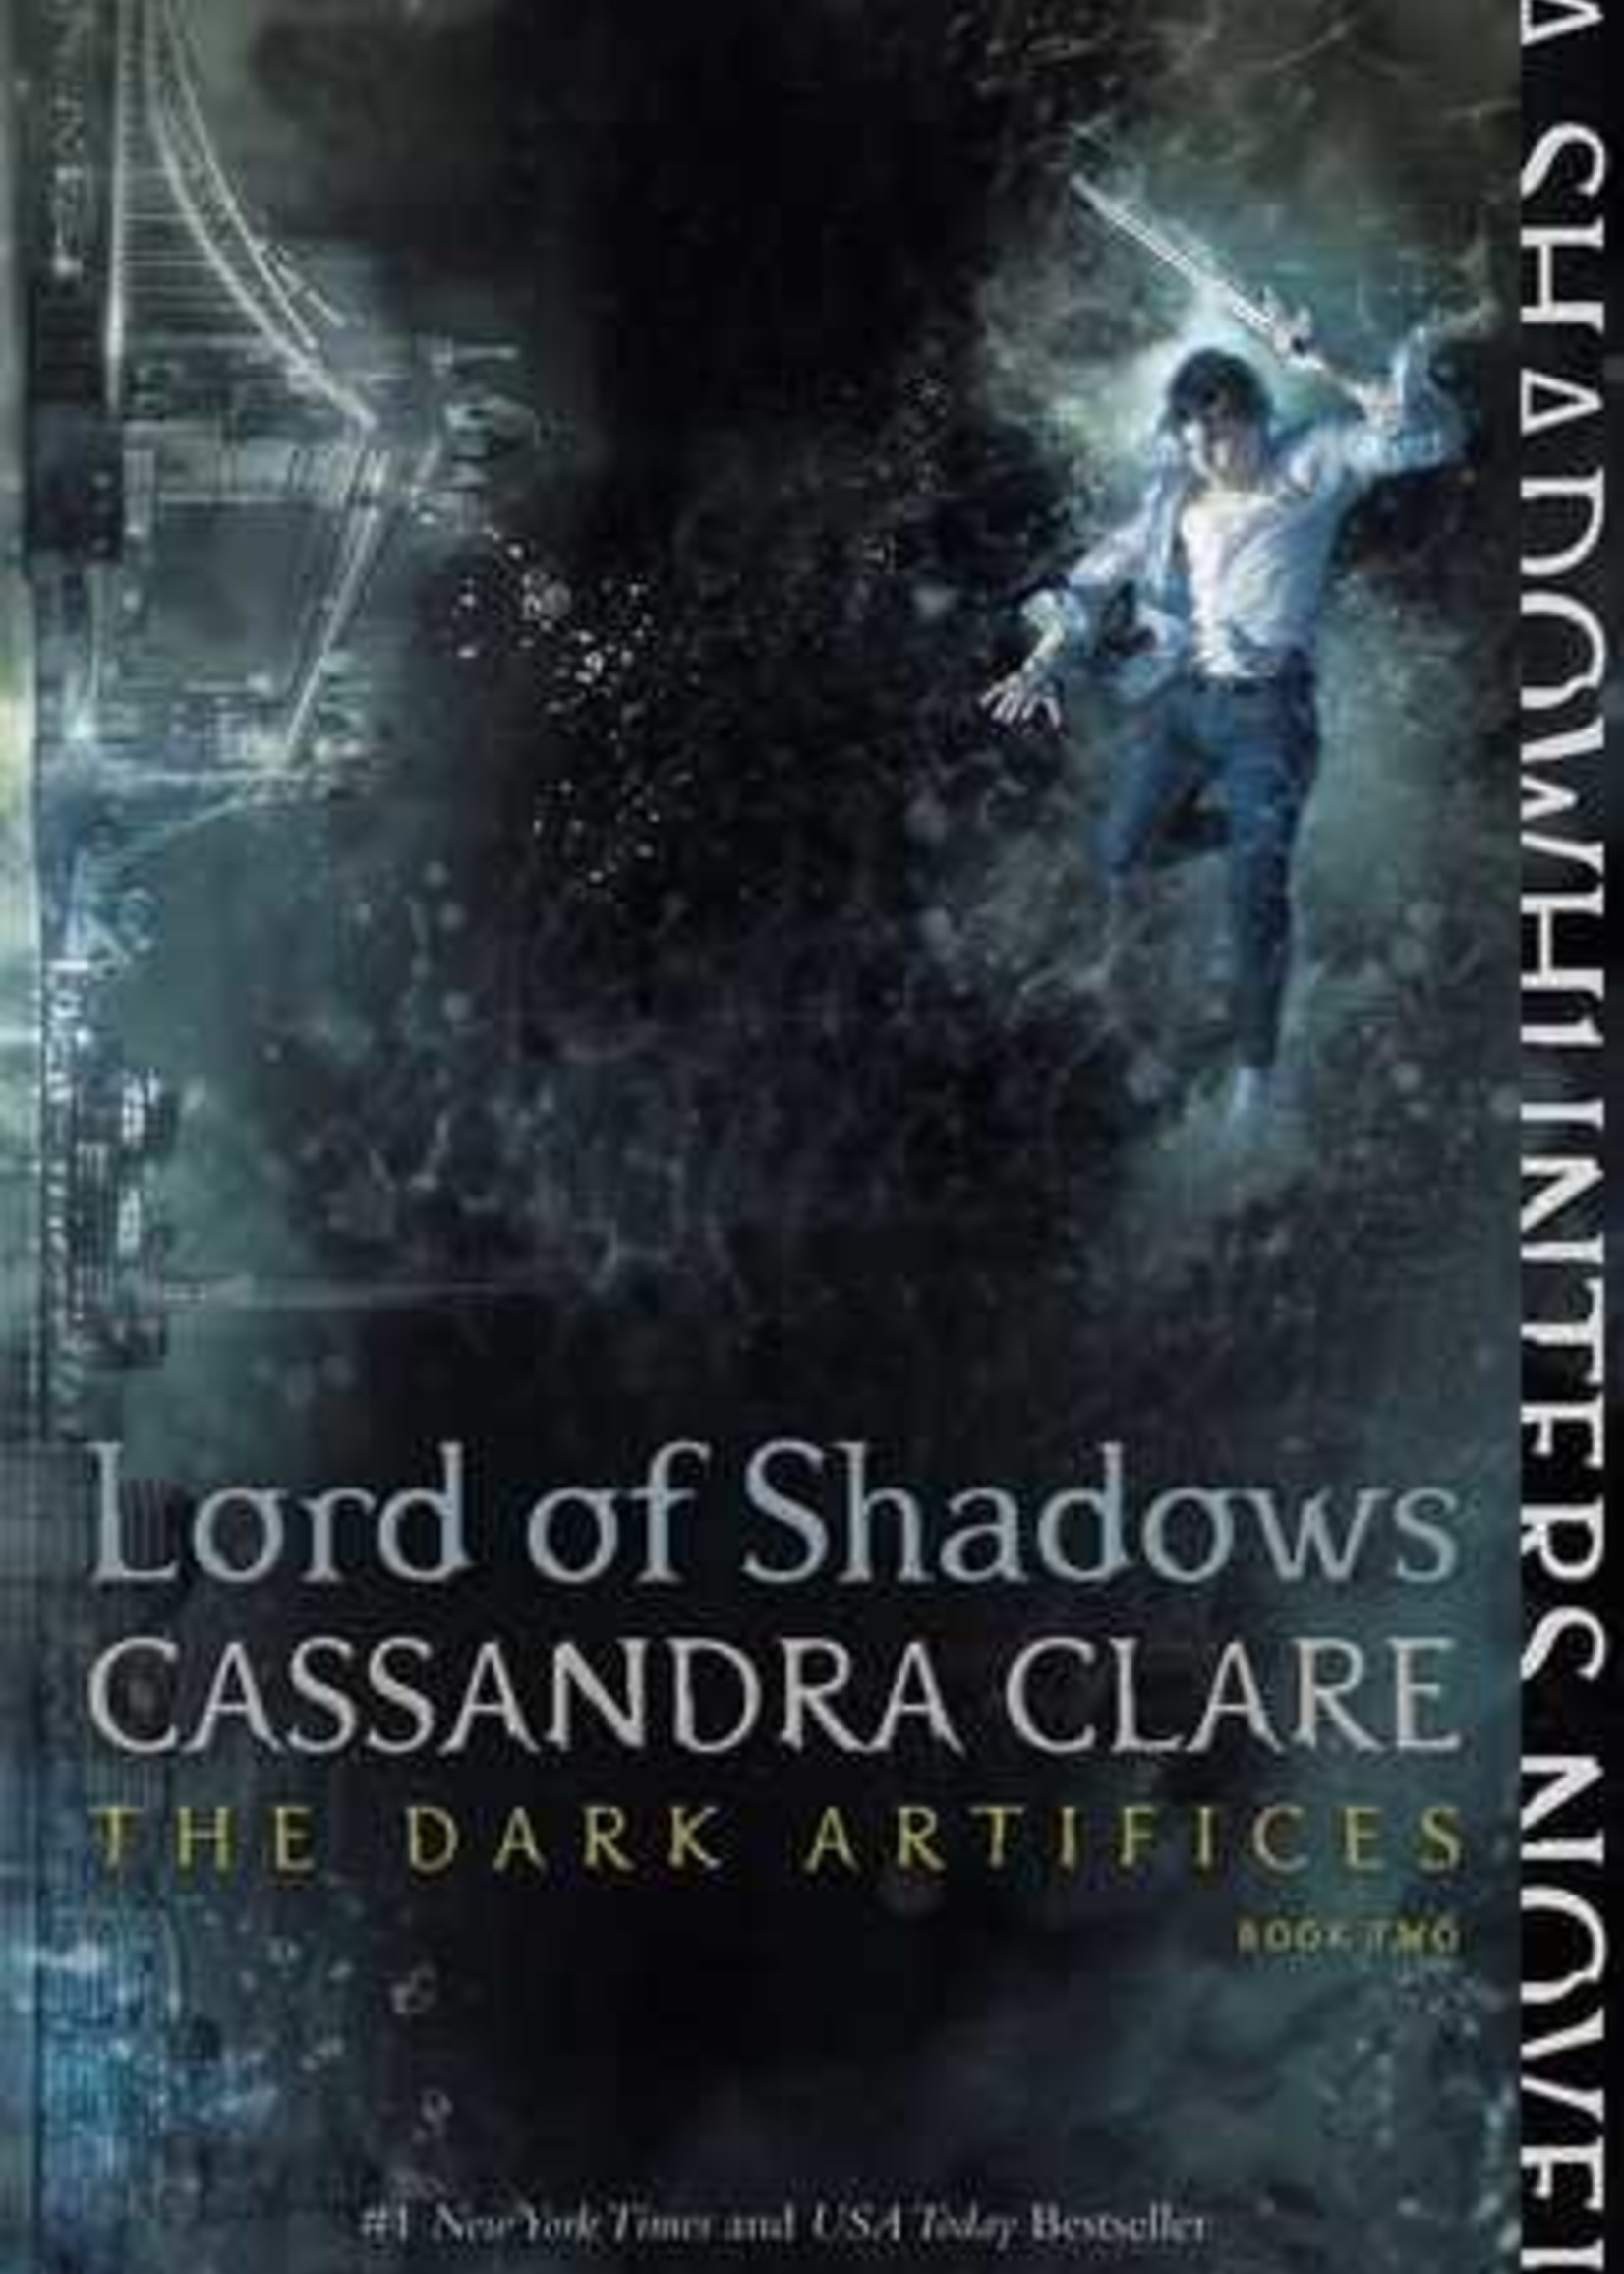 Lord of Shadows (The Dark Artifices #2) by Cassandra Clare